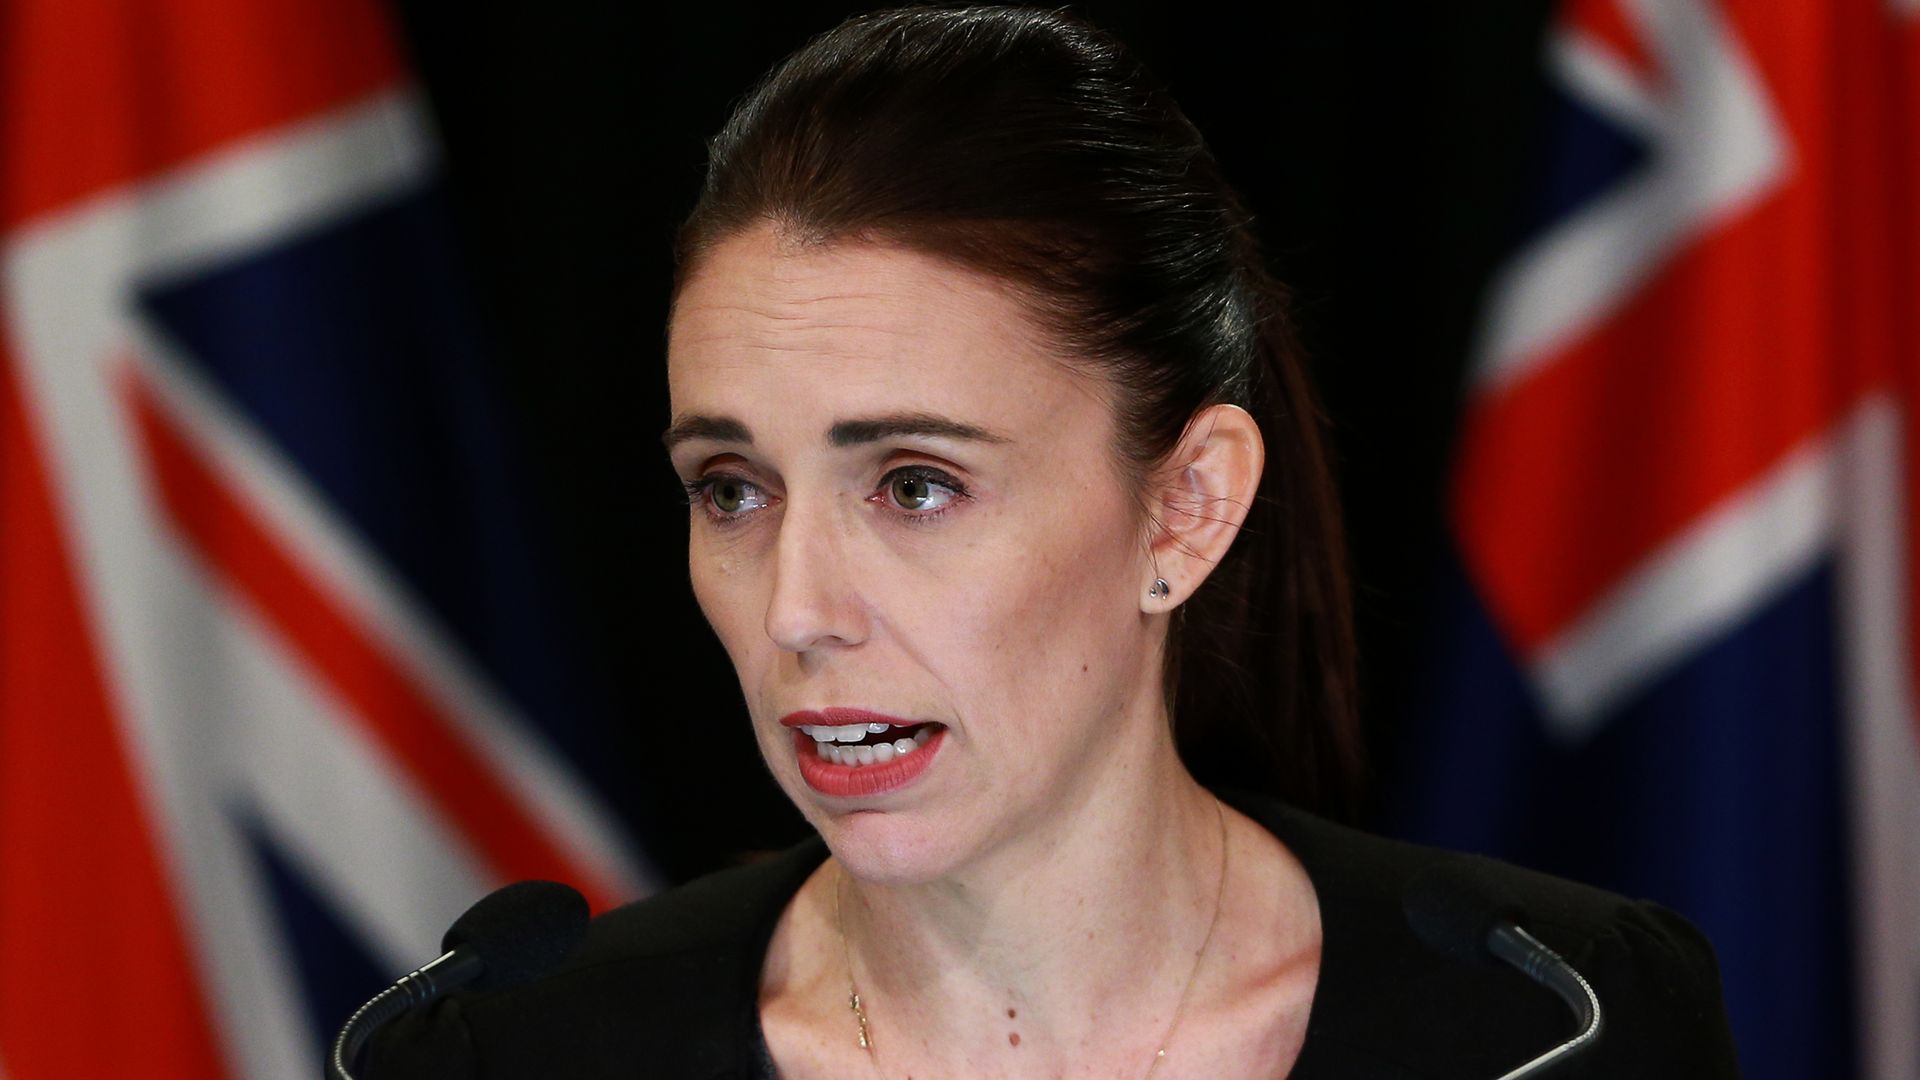 Jacinda Ardern has announced a Royal Commission of Inquiry into New Zealand's mosque attacks.